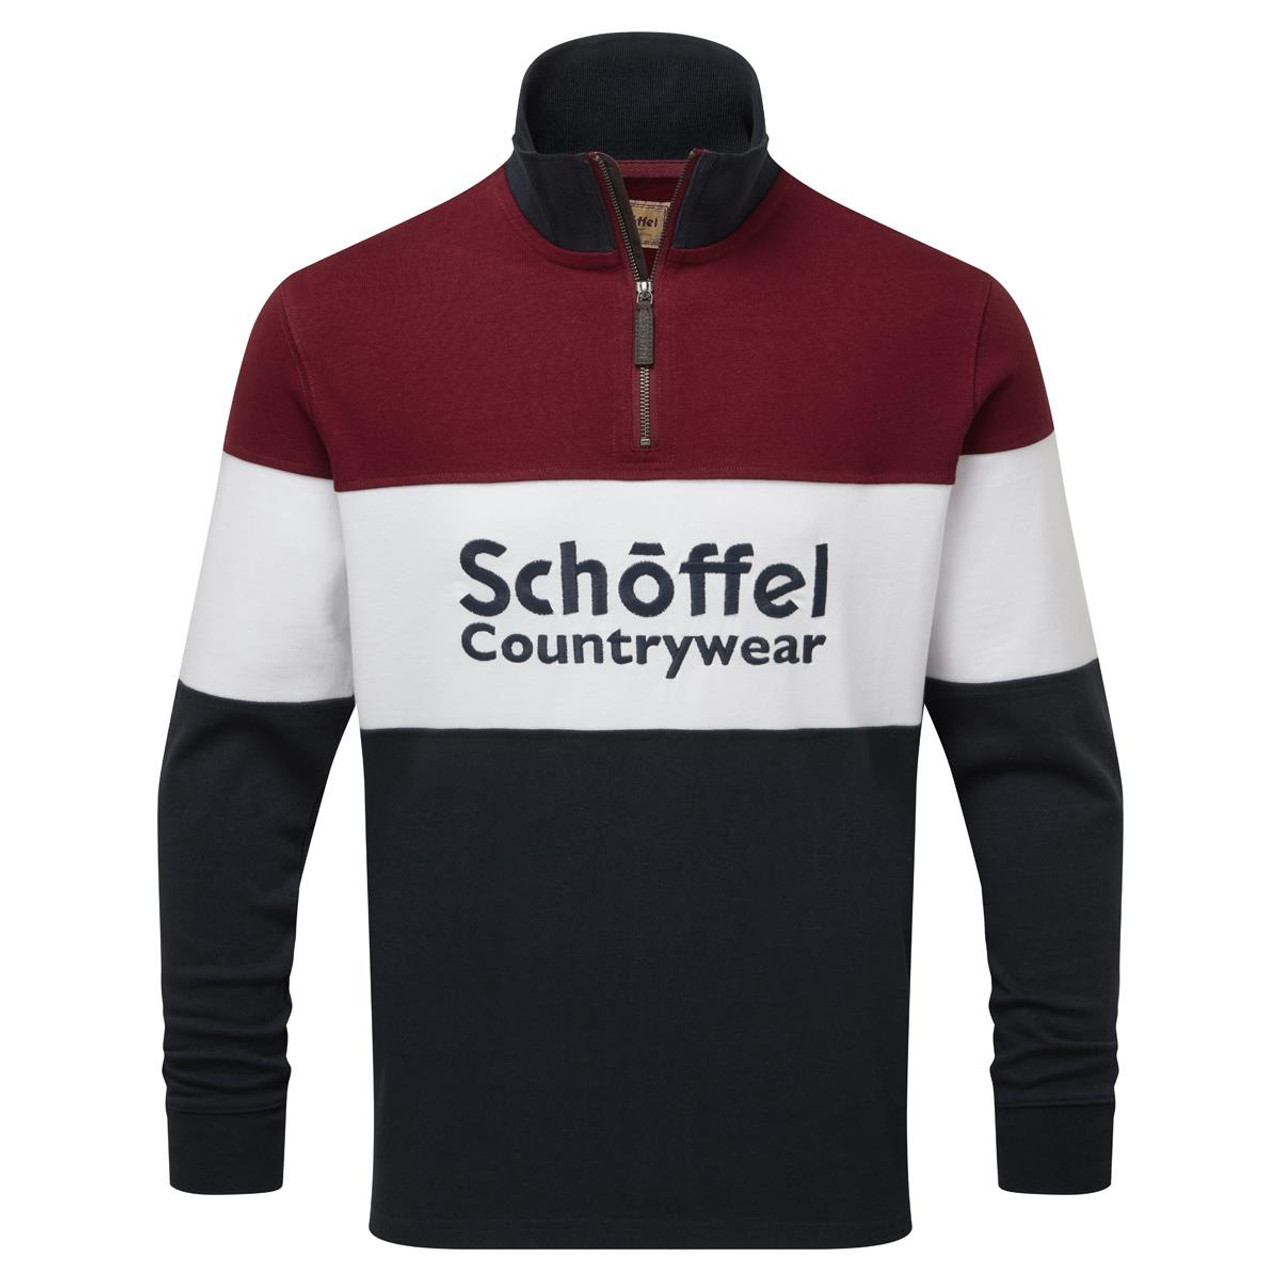 What is the fitting of the Schoffel Exeter sweater?